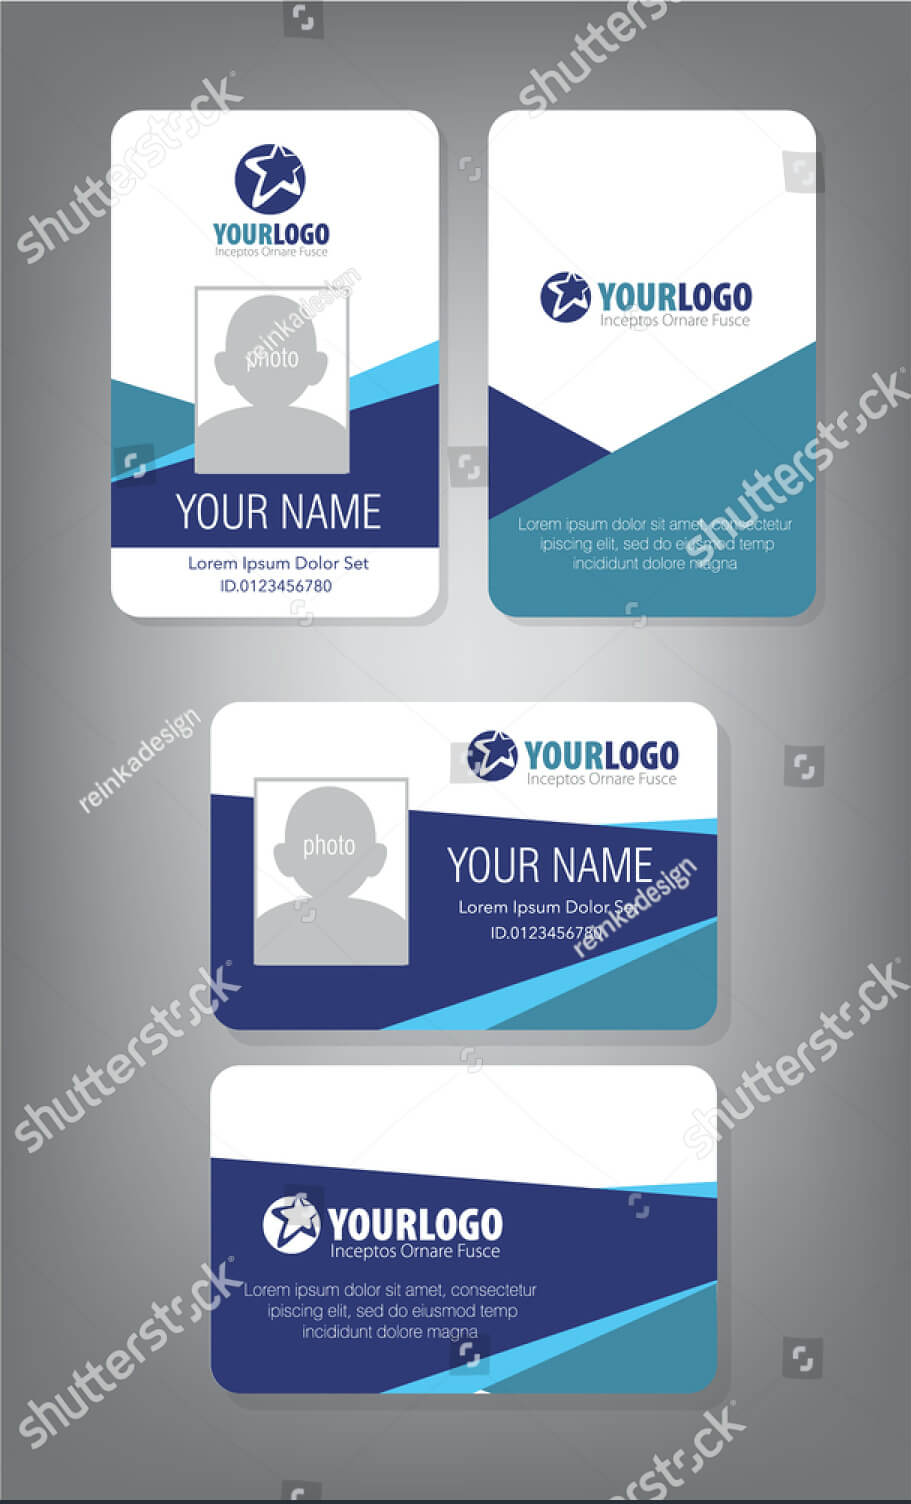 43+ Professional Id Card Designs – Psd, Eps, Ai, Word | Free Throughout College Id Card Template Psd